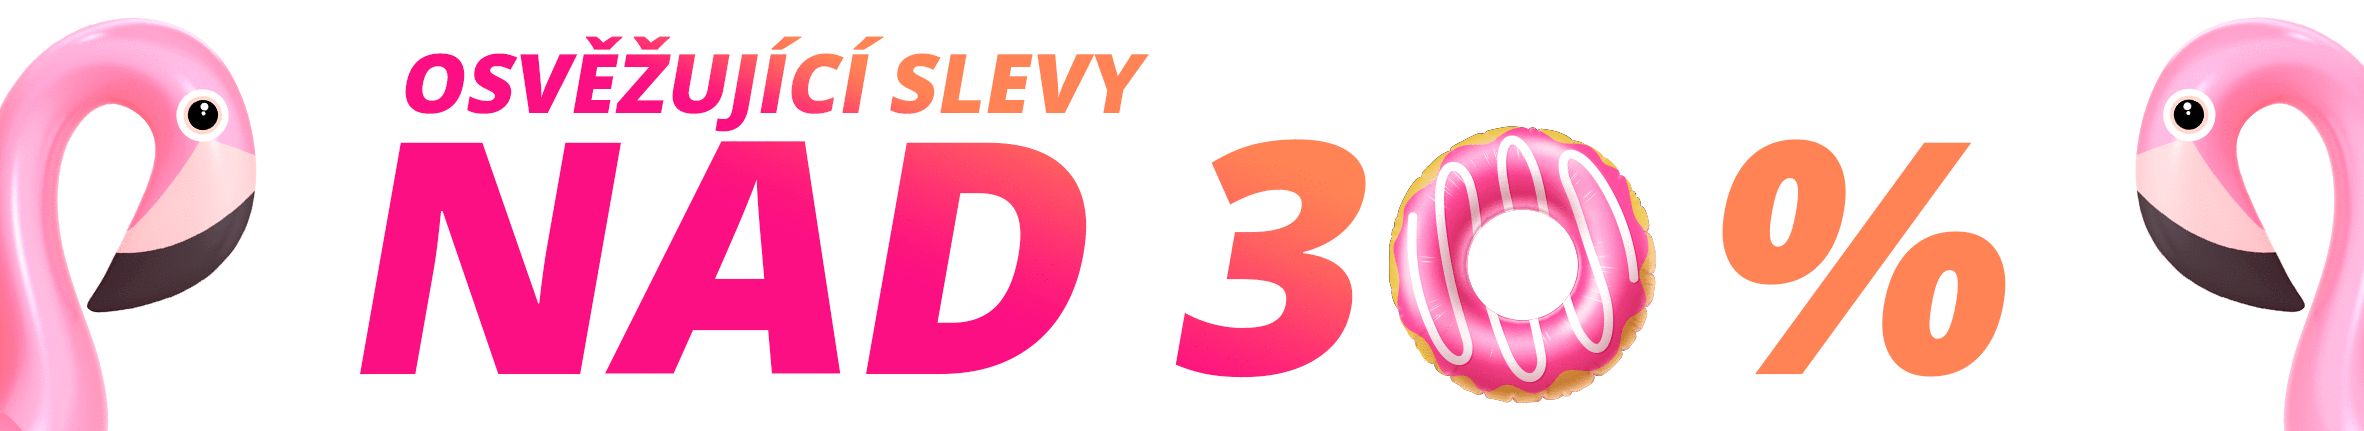 slevy 30